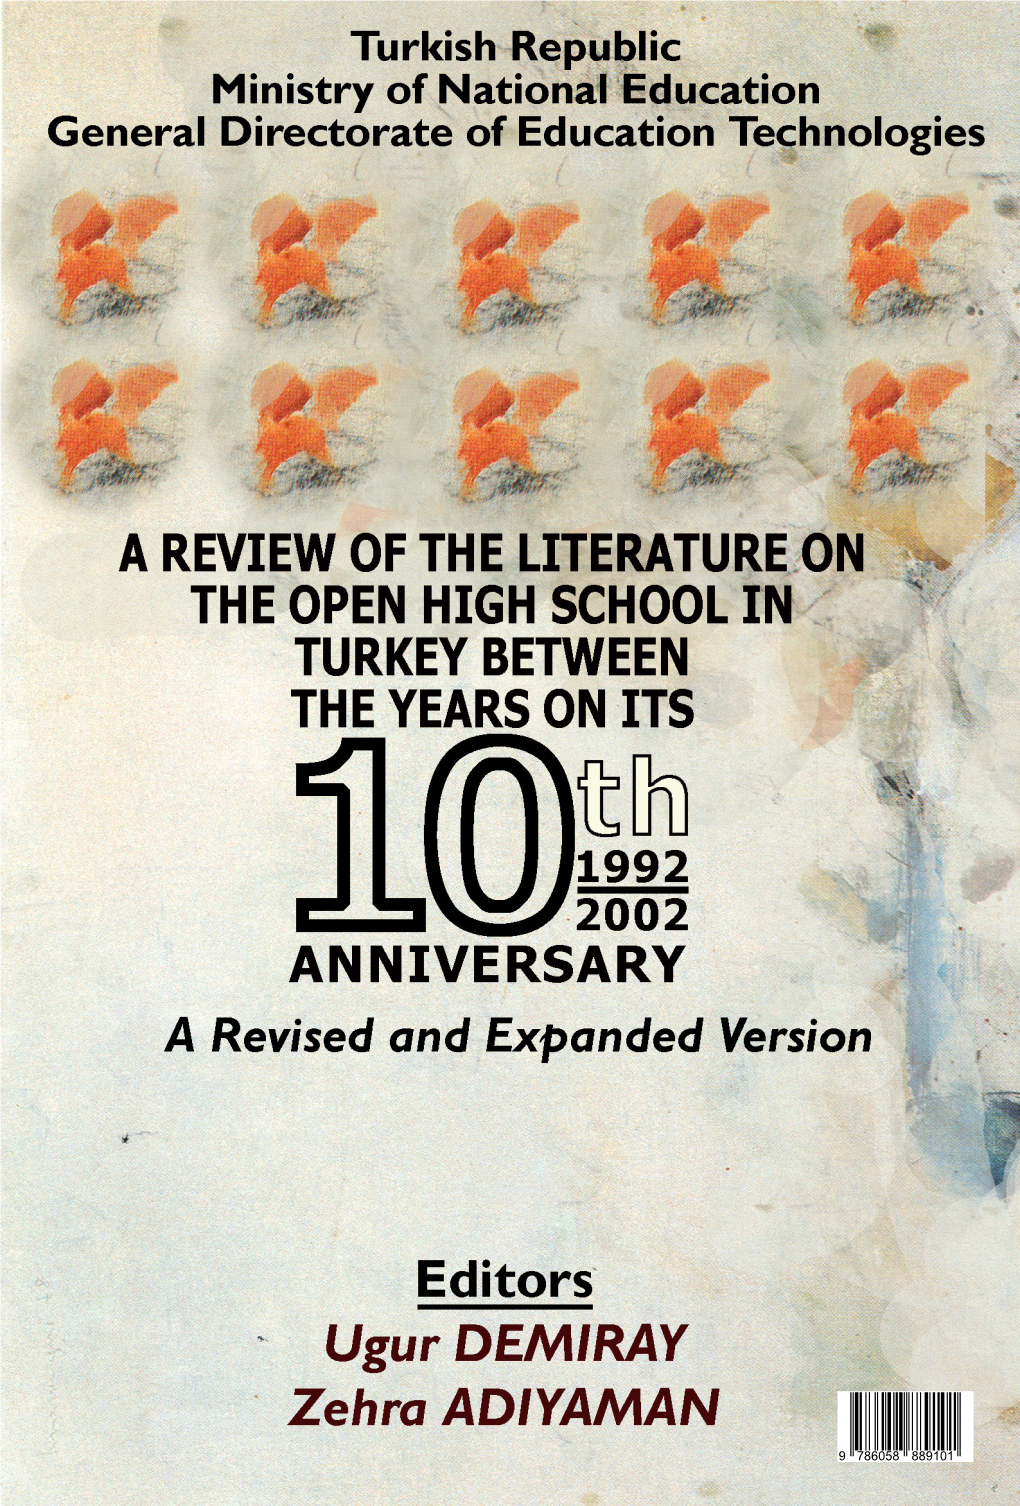 A REVIEW of the LITERATURE on the OPEN HIGH SCHOOL in TURKEY BETWEEN the YEARS on ITS 10Th ANNIVERSARY (1992-2002)